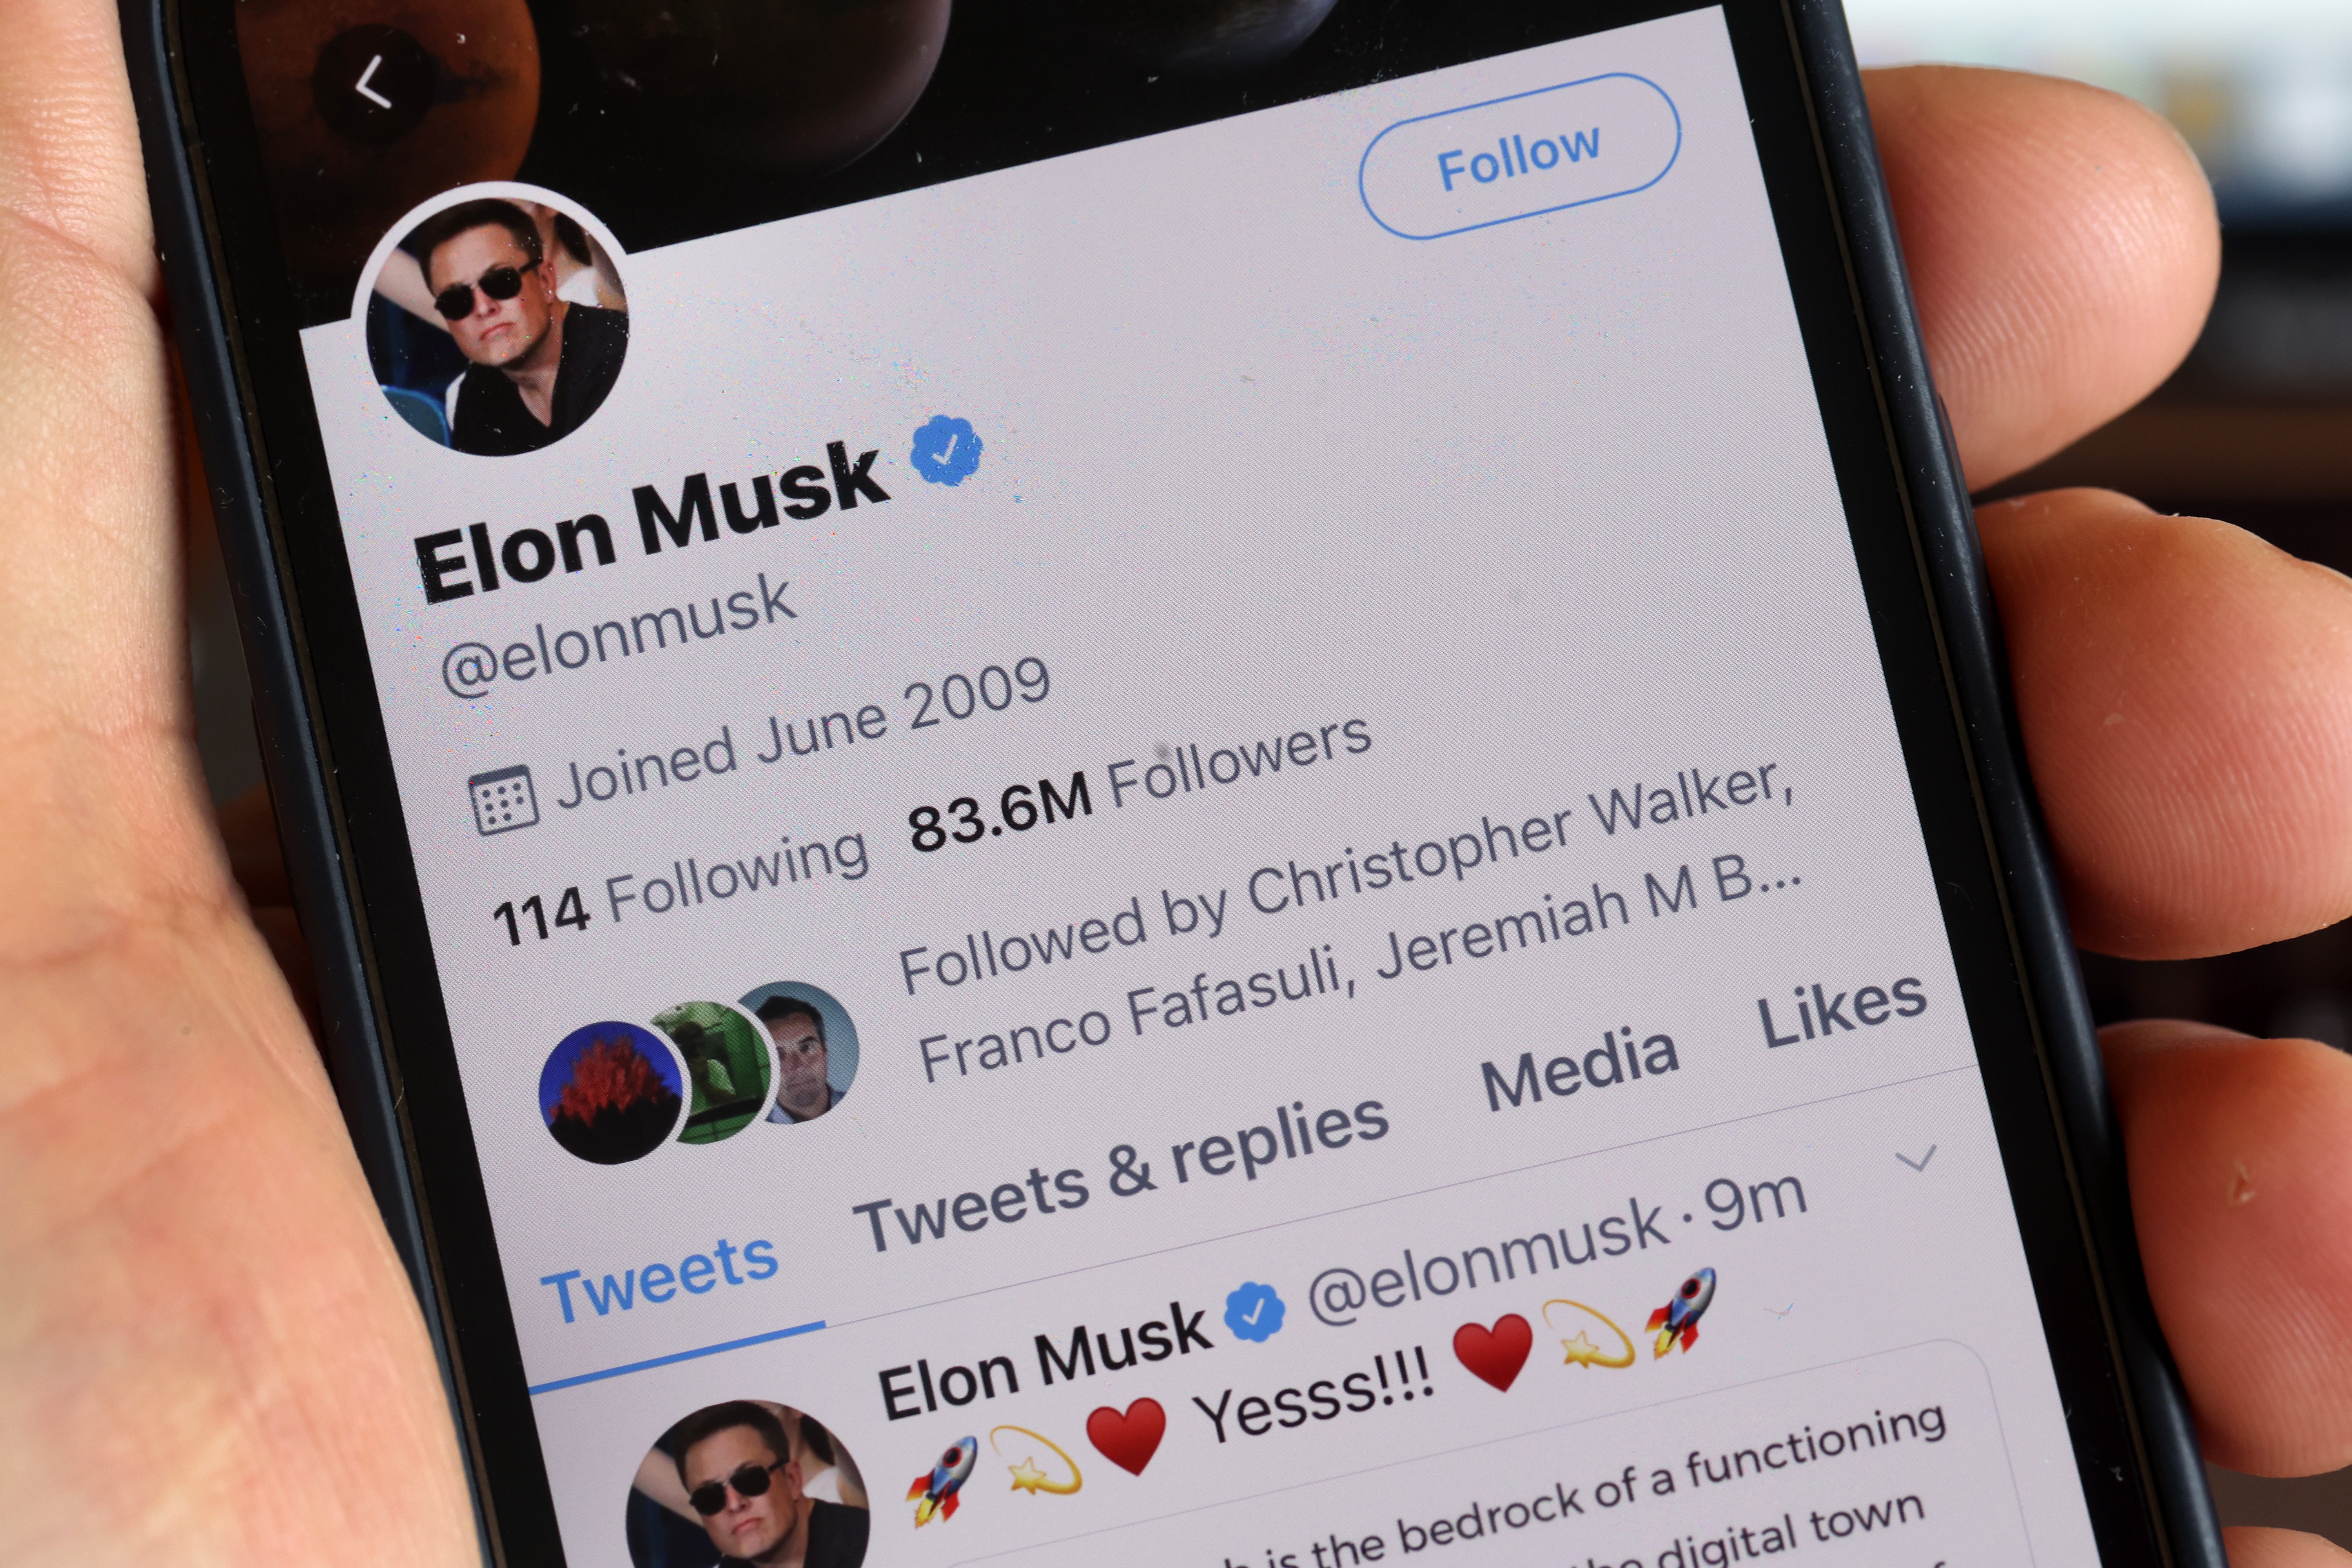 Musk has more than 80 million followers on Twitter